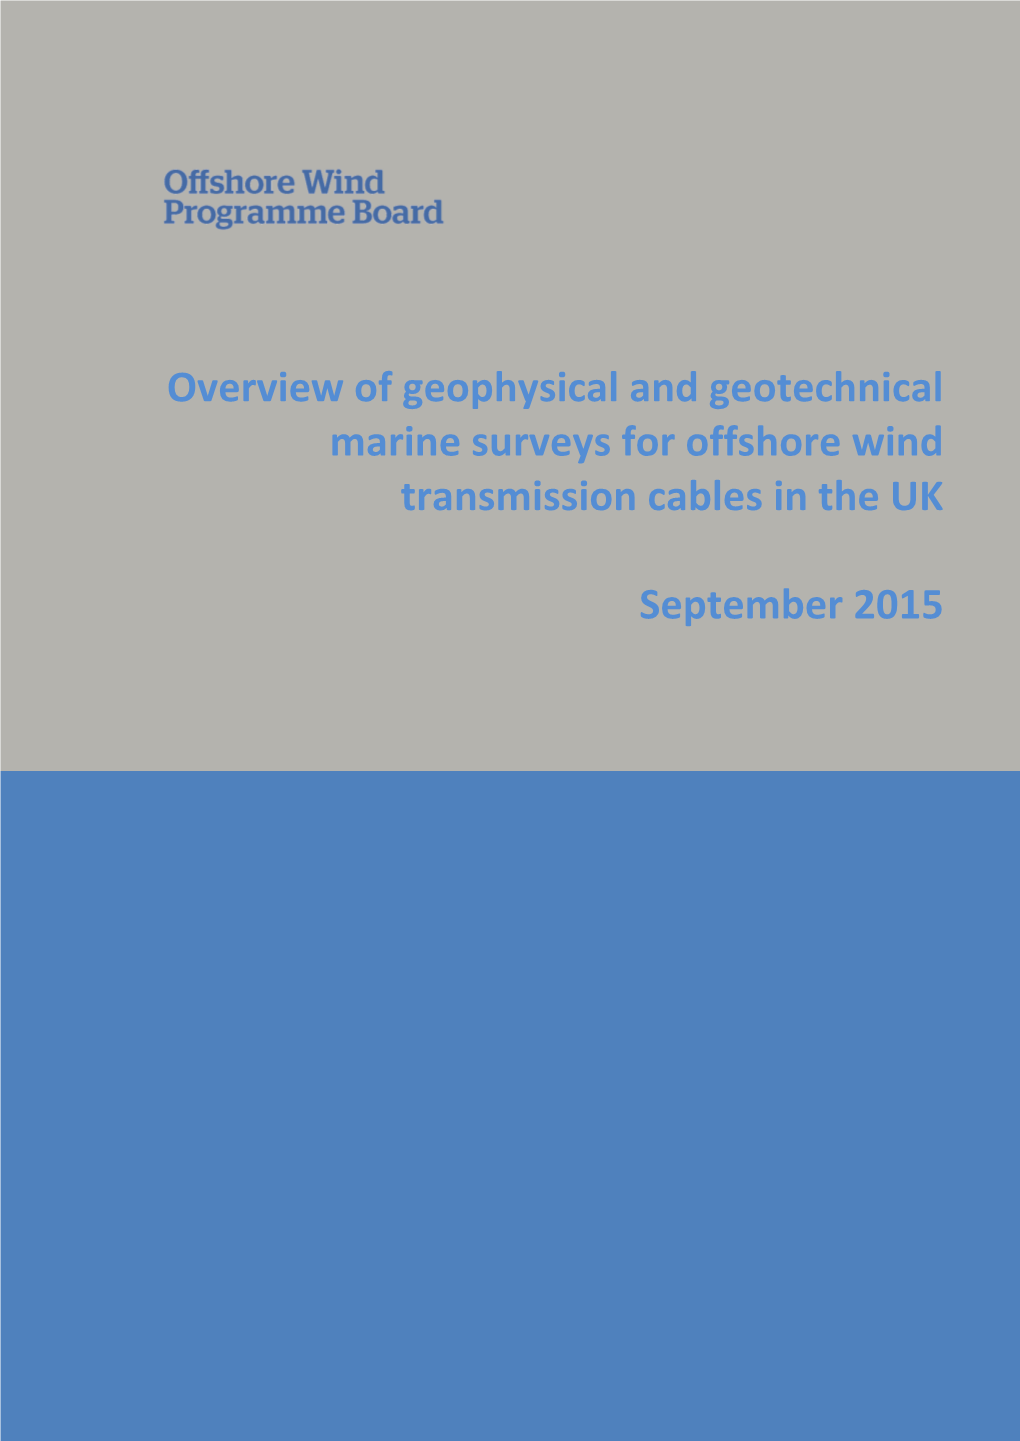 Overview of Geophysical and Geotechnical Marine Surveys for Offshore Wind Transmission Cables in the UK September 2015